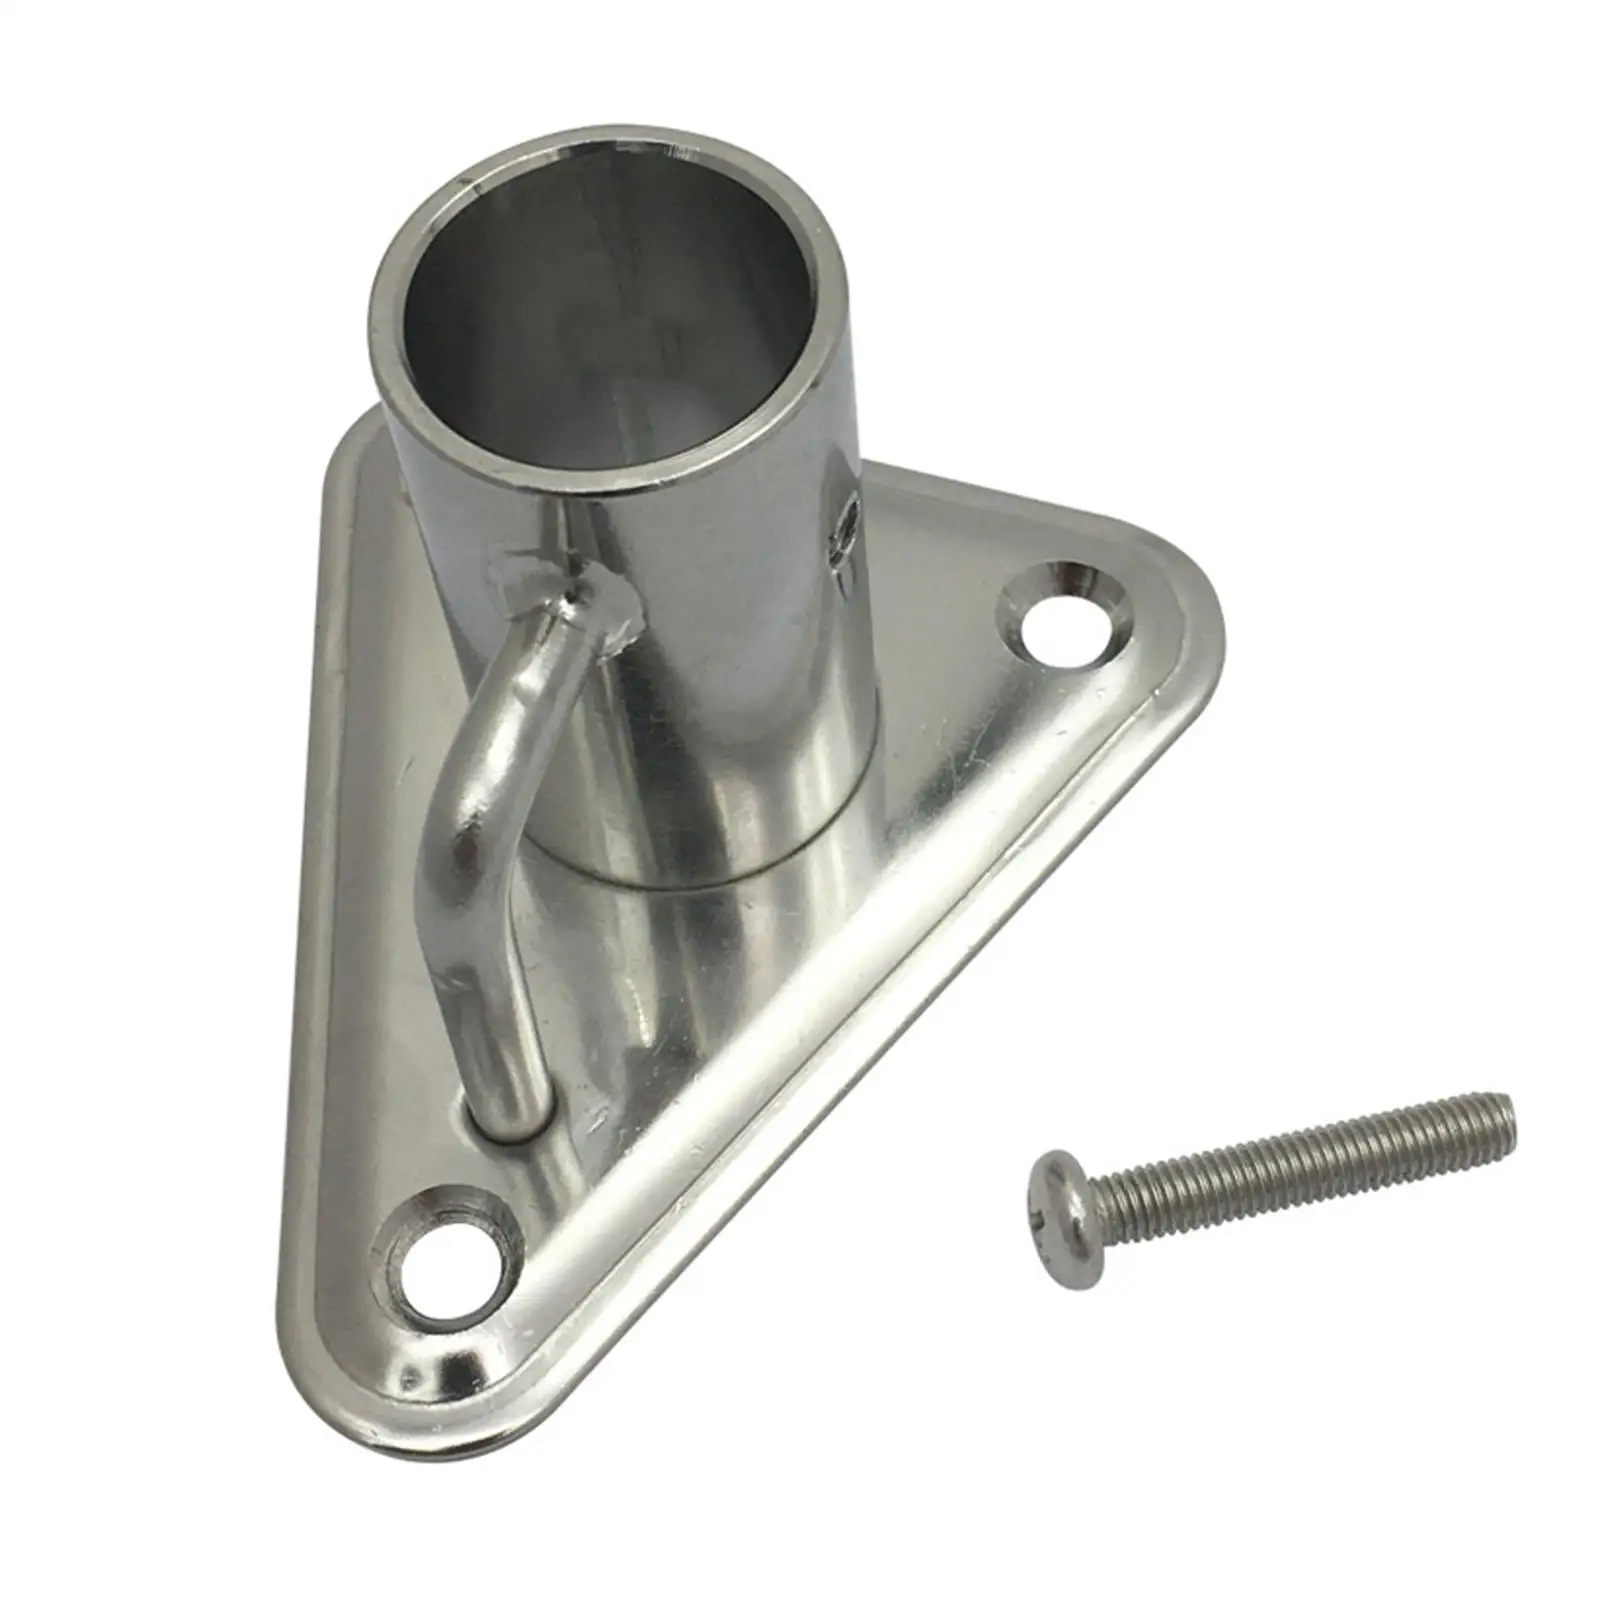 Marine Stanchion Socket 90 for 25mm Tube 316 Stainless Steel with Triangular Base and Buttress for Accessories